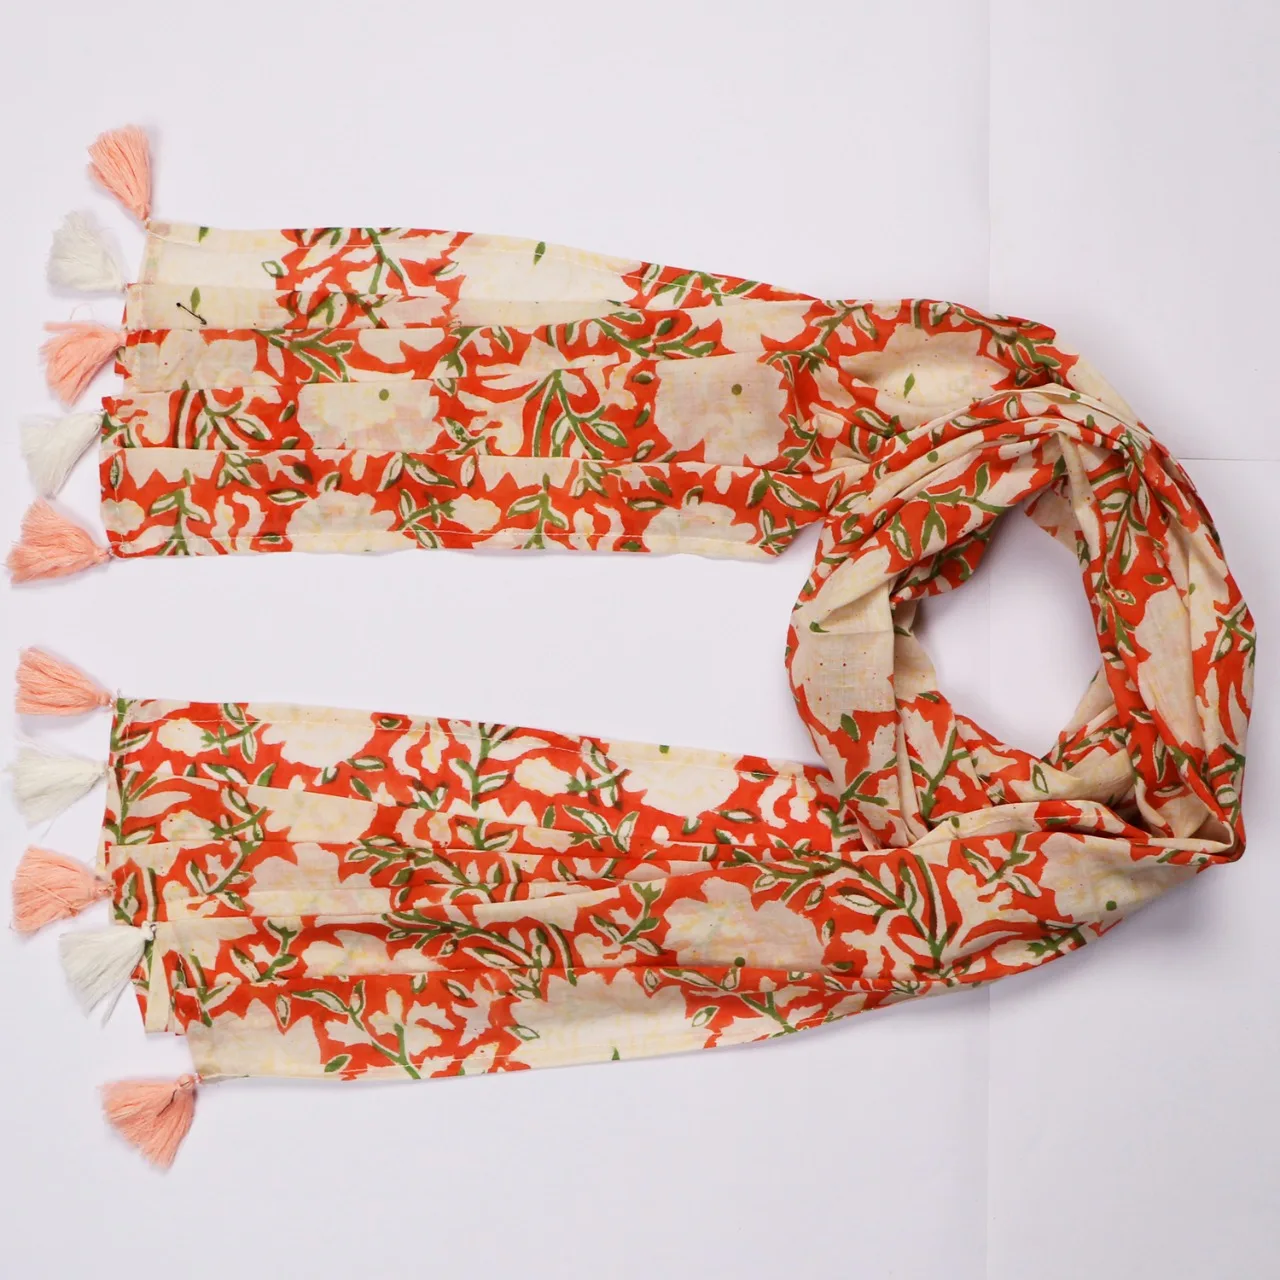 Hot Stalling Hand Block Printed Stoles for Women Suits Scarf at Wholesale Price from Indian Manufacturer and Exporter